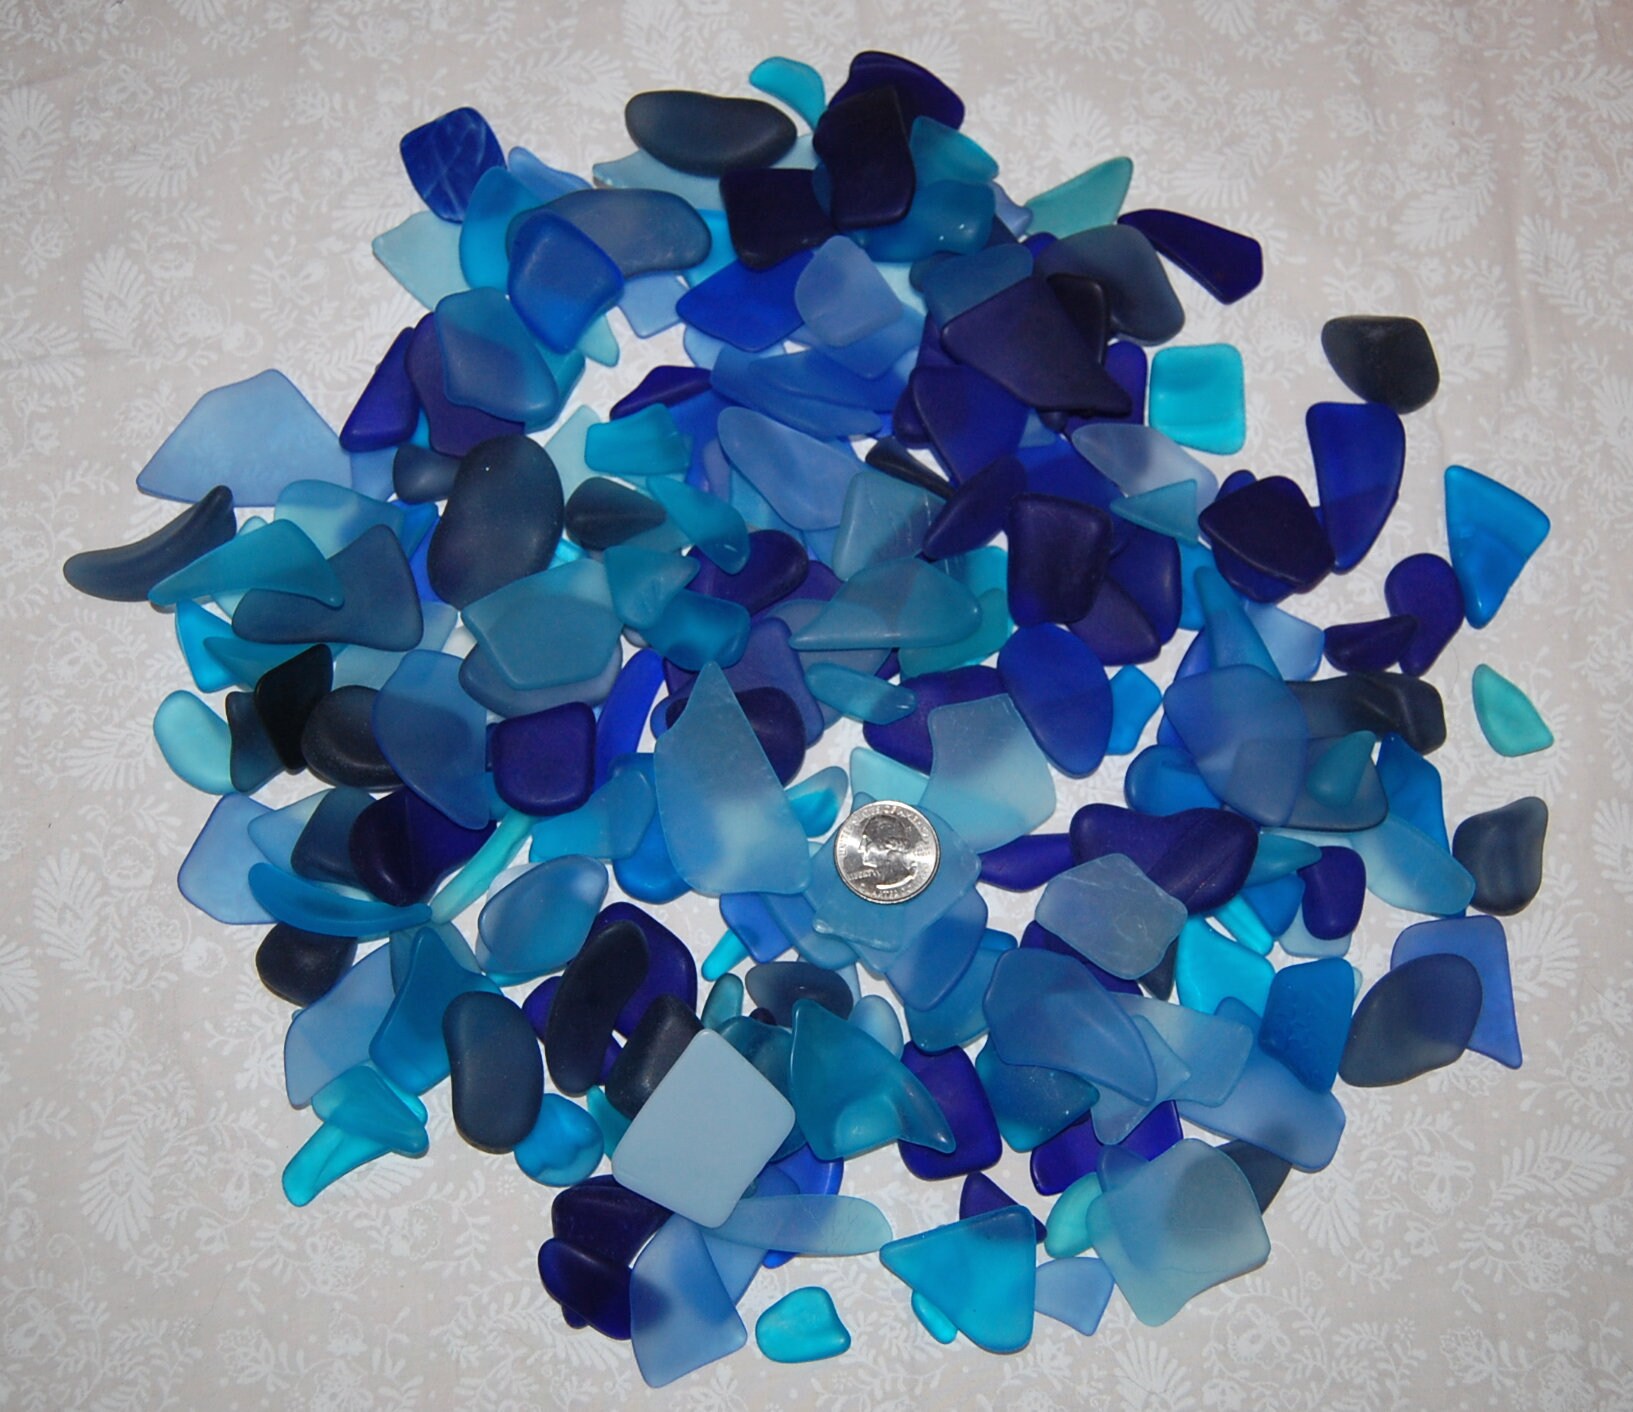 1/2 inch MACHINE MADE RECYCLED TUMBLED BEACH SEA GLASS 10 POUNDS 1/4 inch 